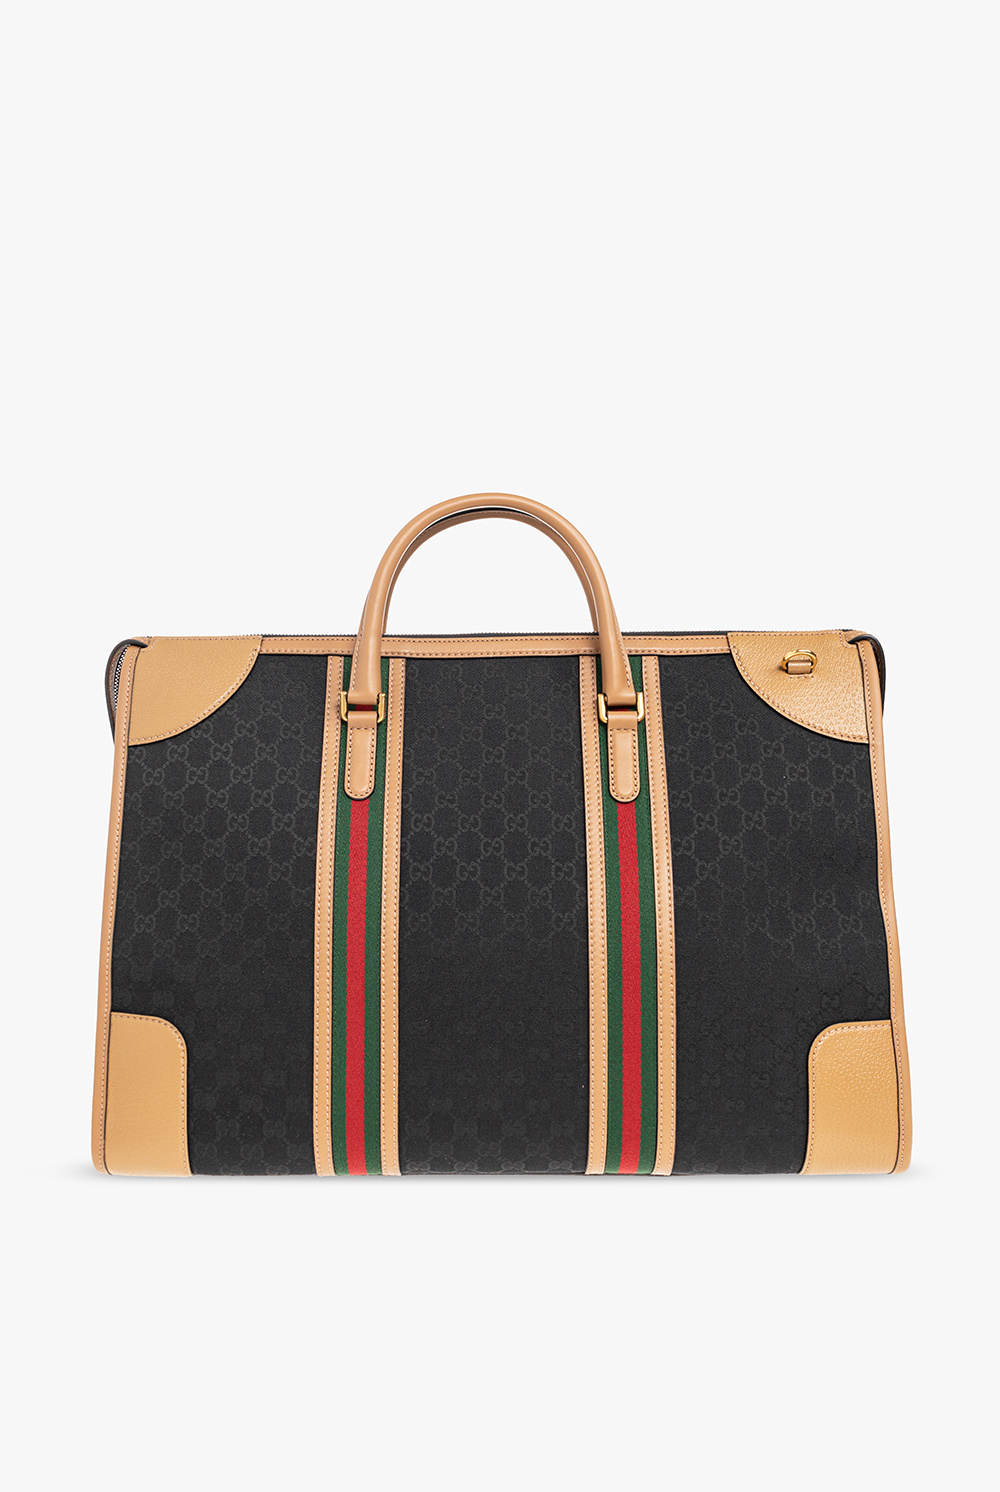 Gucci Web Carry-On Duffle Bag - Couture USA